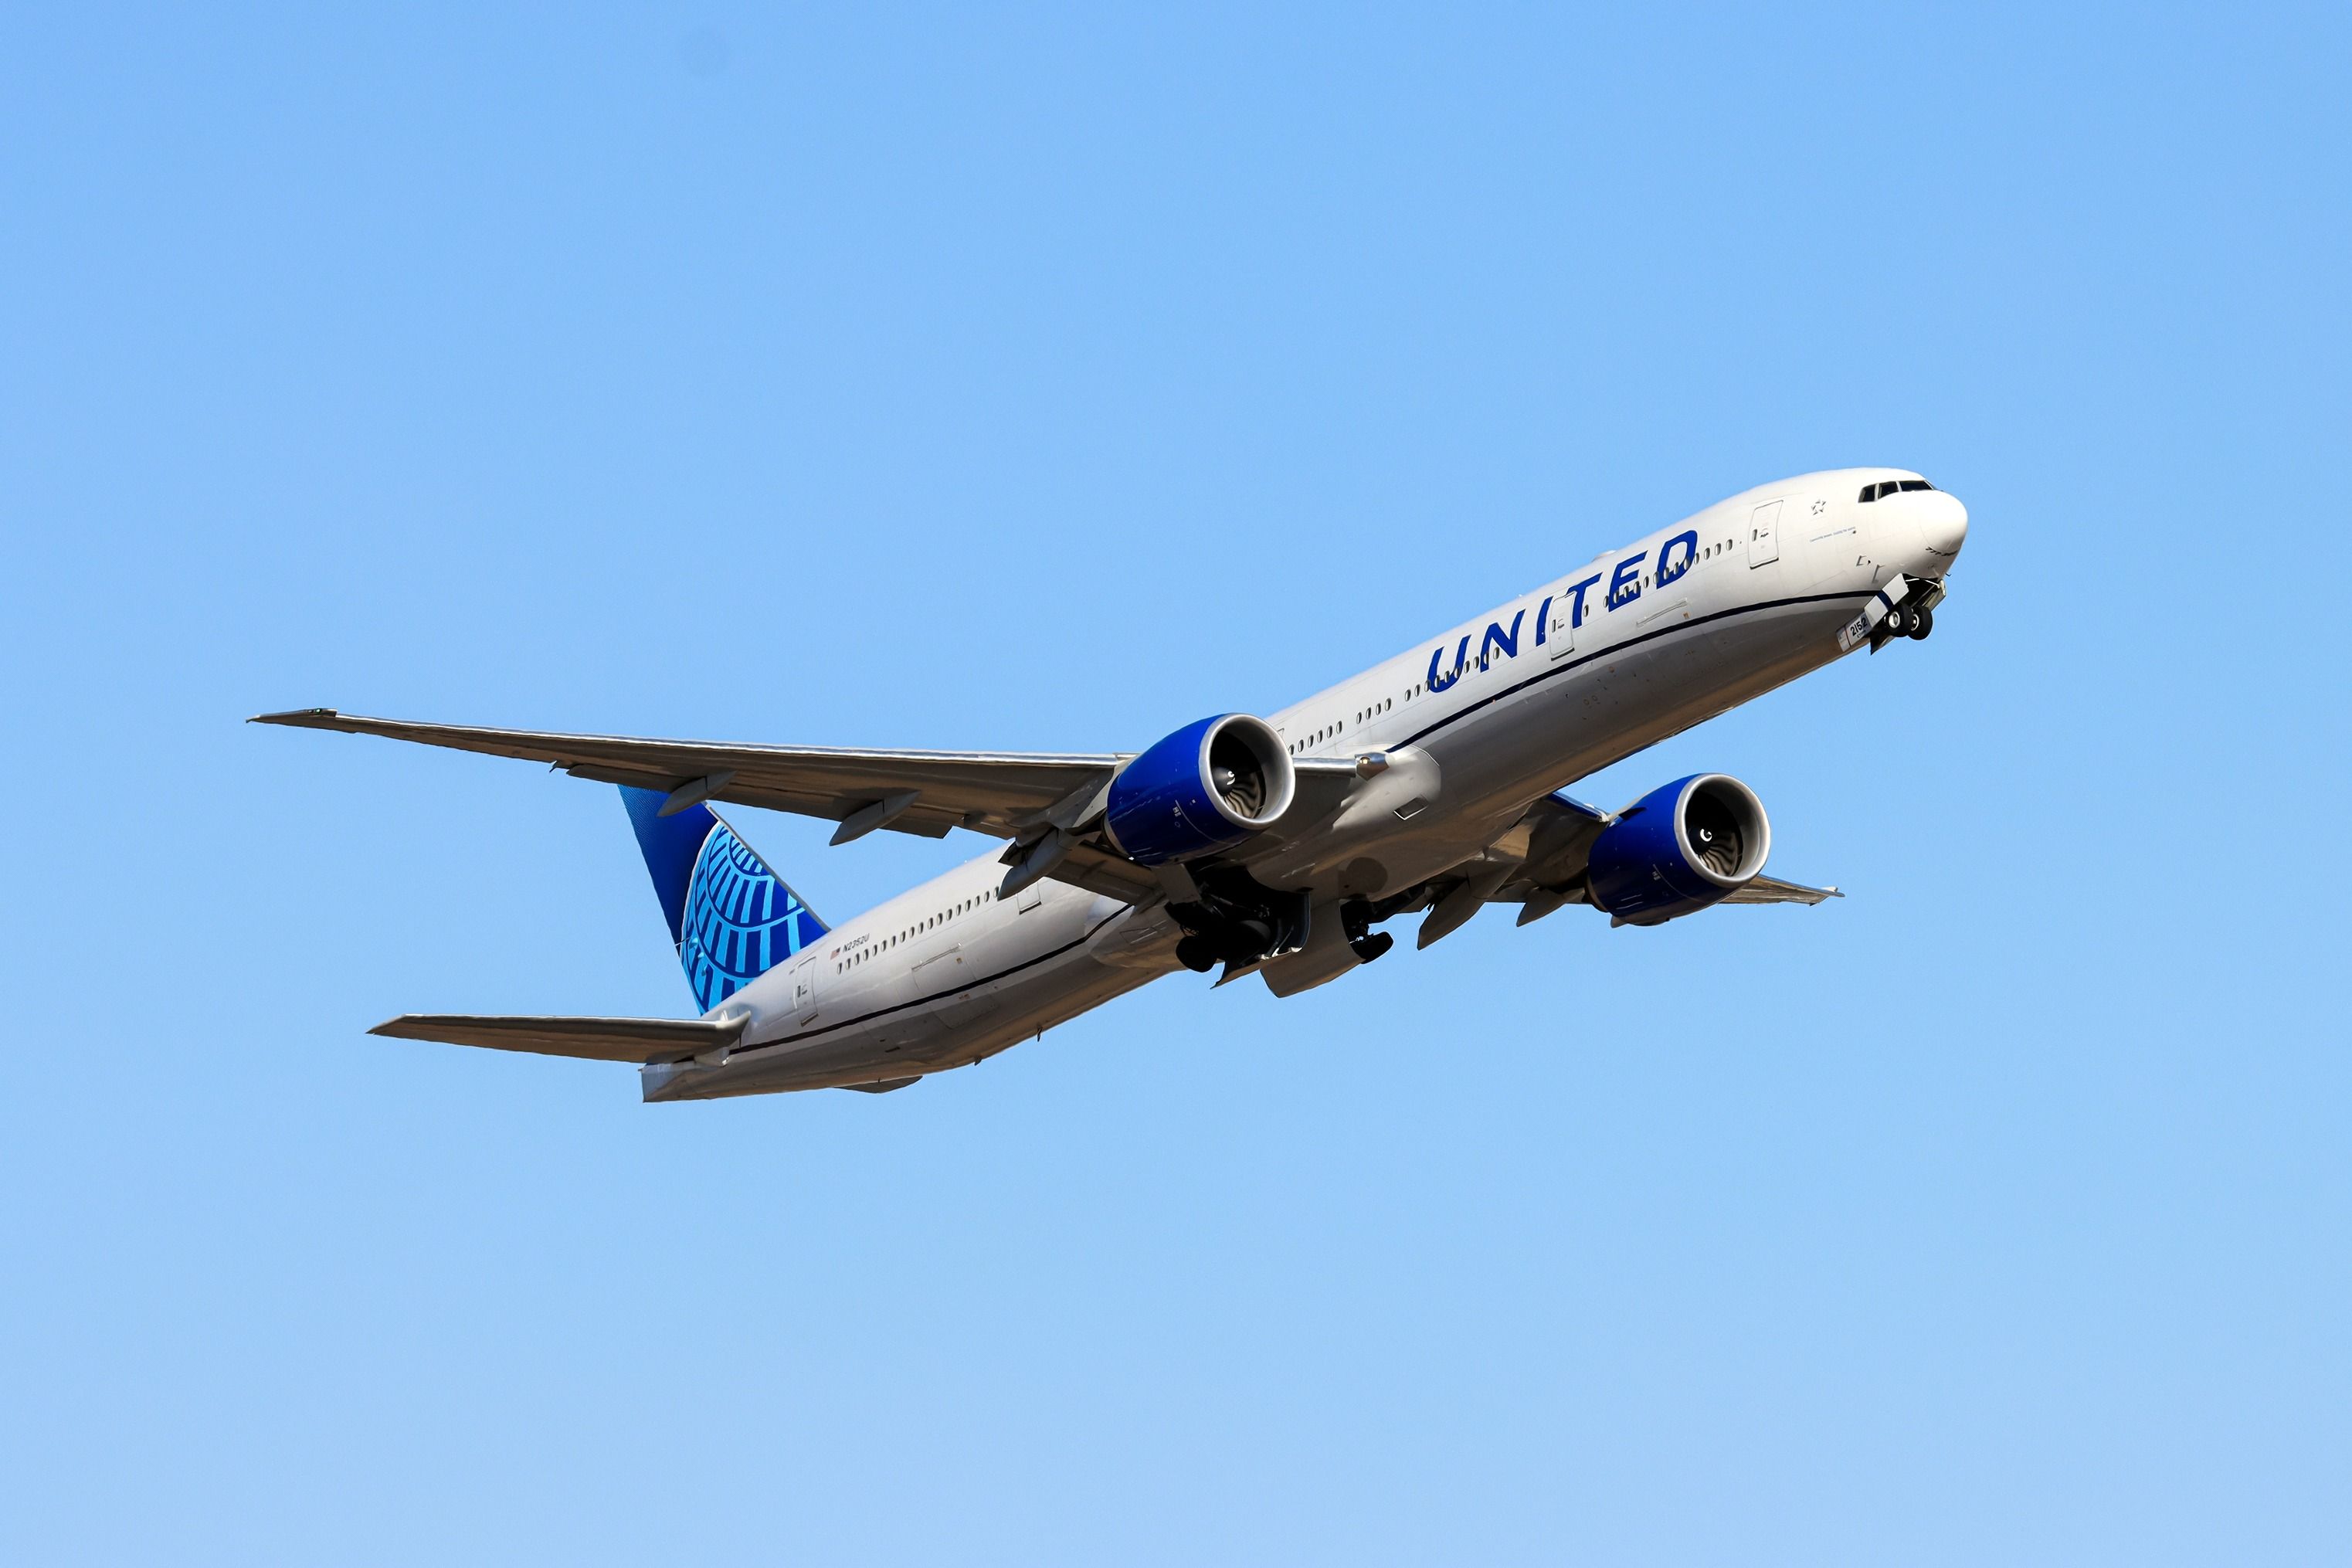 United Airlines Boeing 777 departing